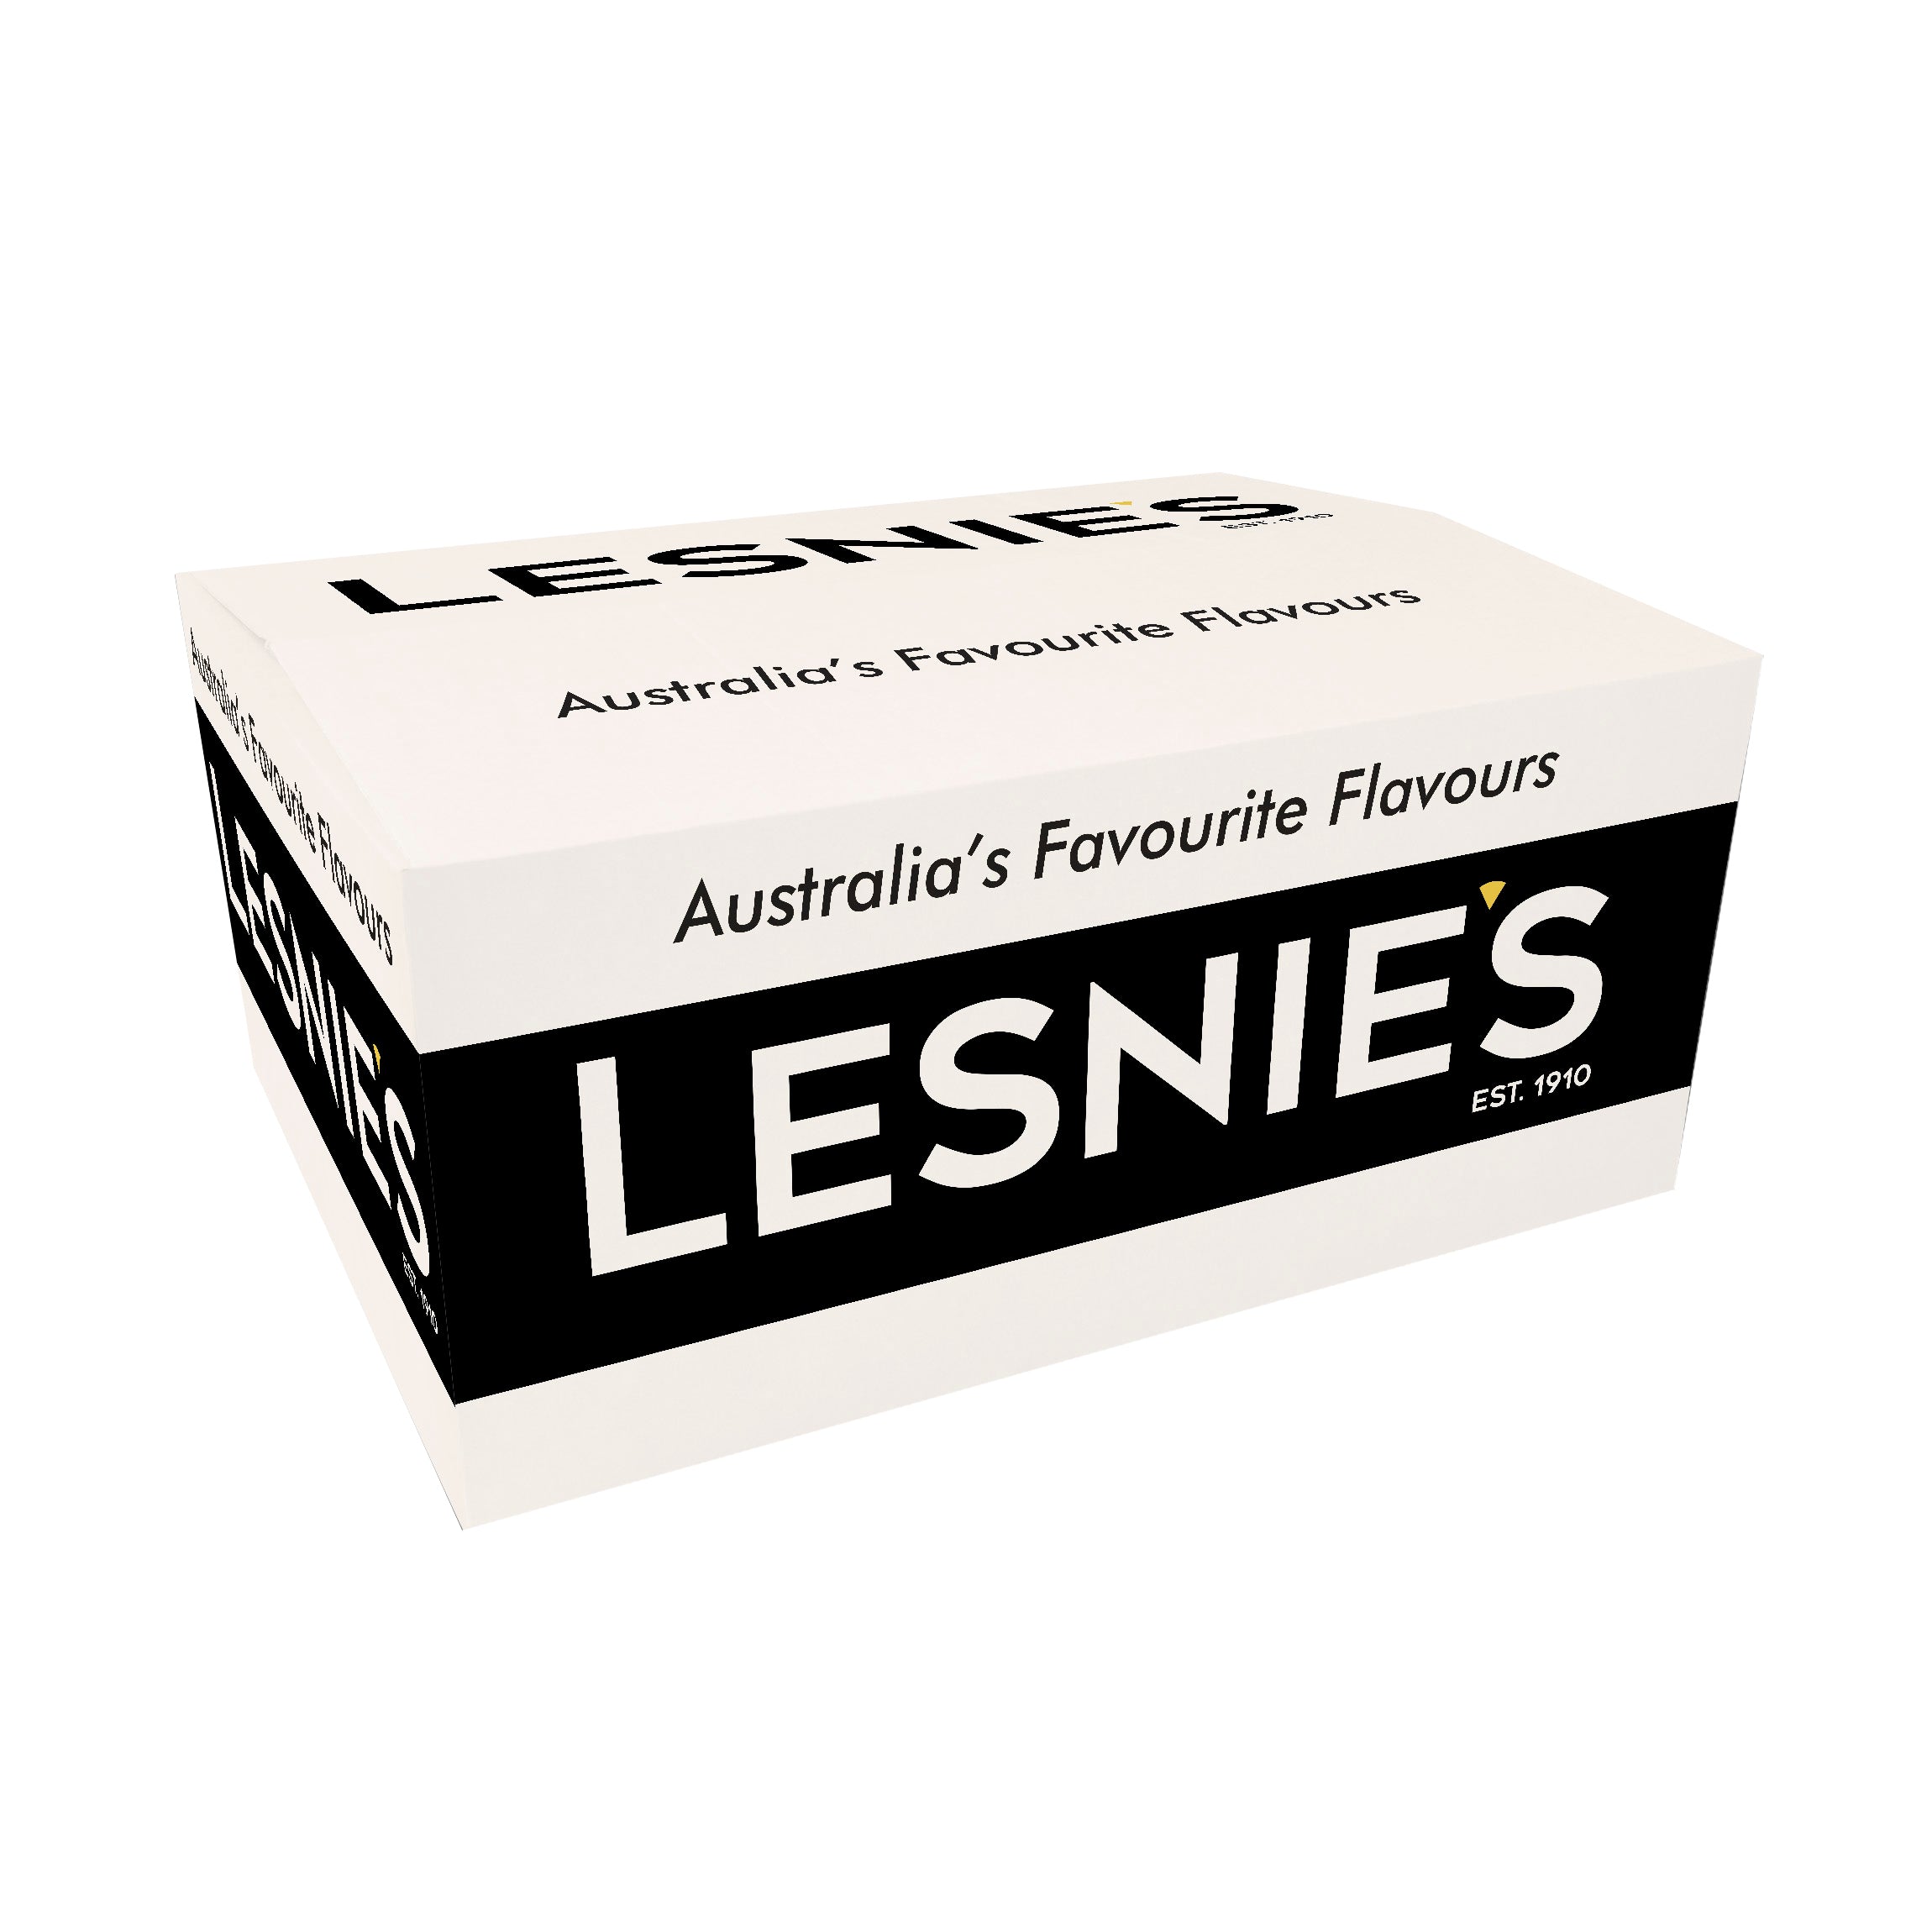 Lesnies Cure Kornite Action 5kg Cooking Ingredients And Sauces  